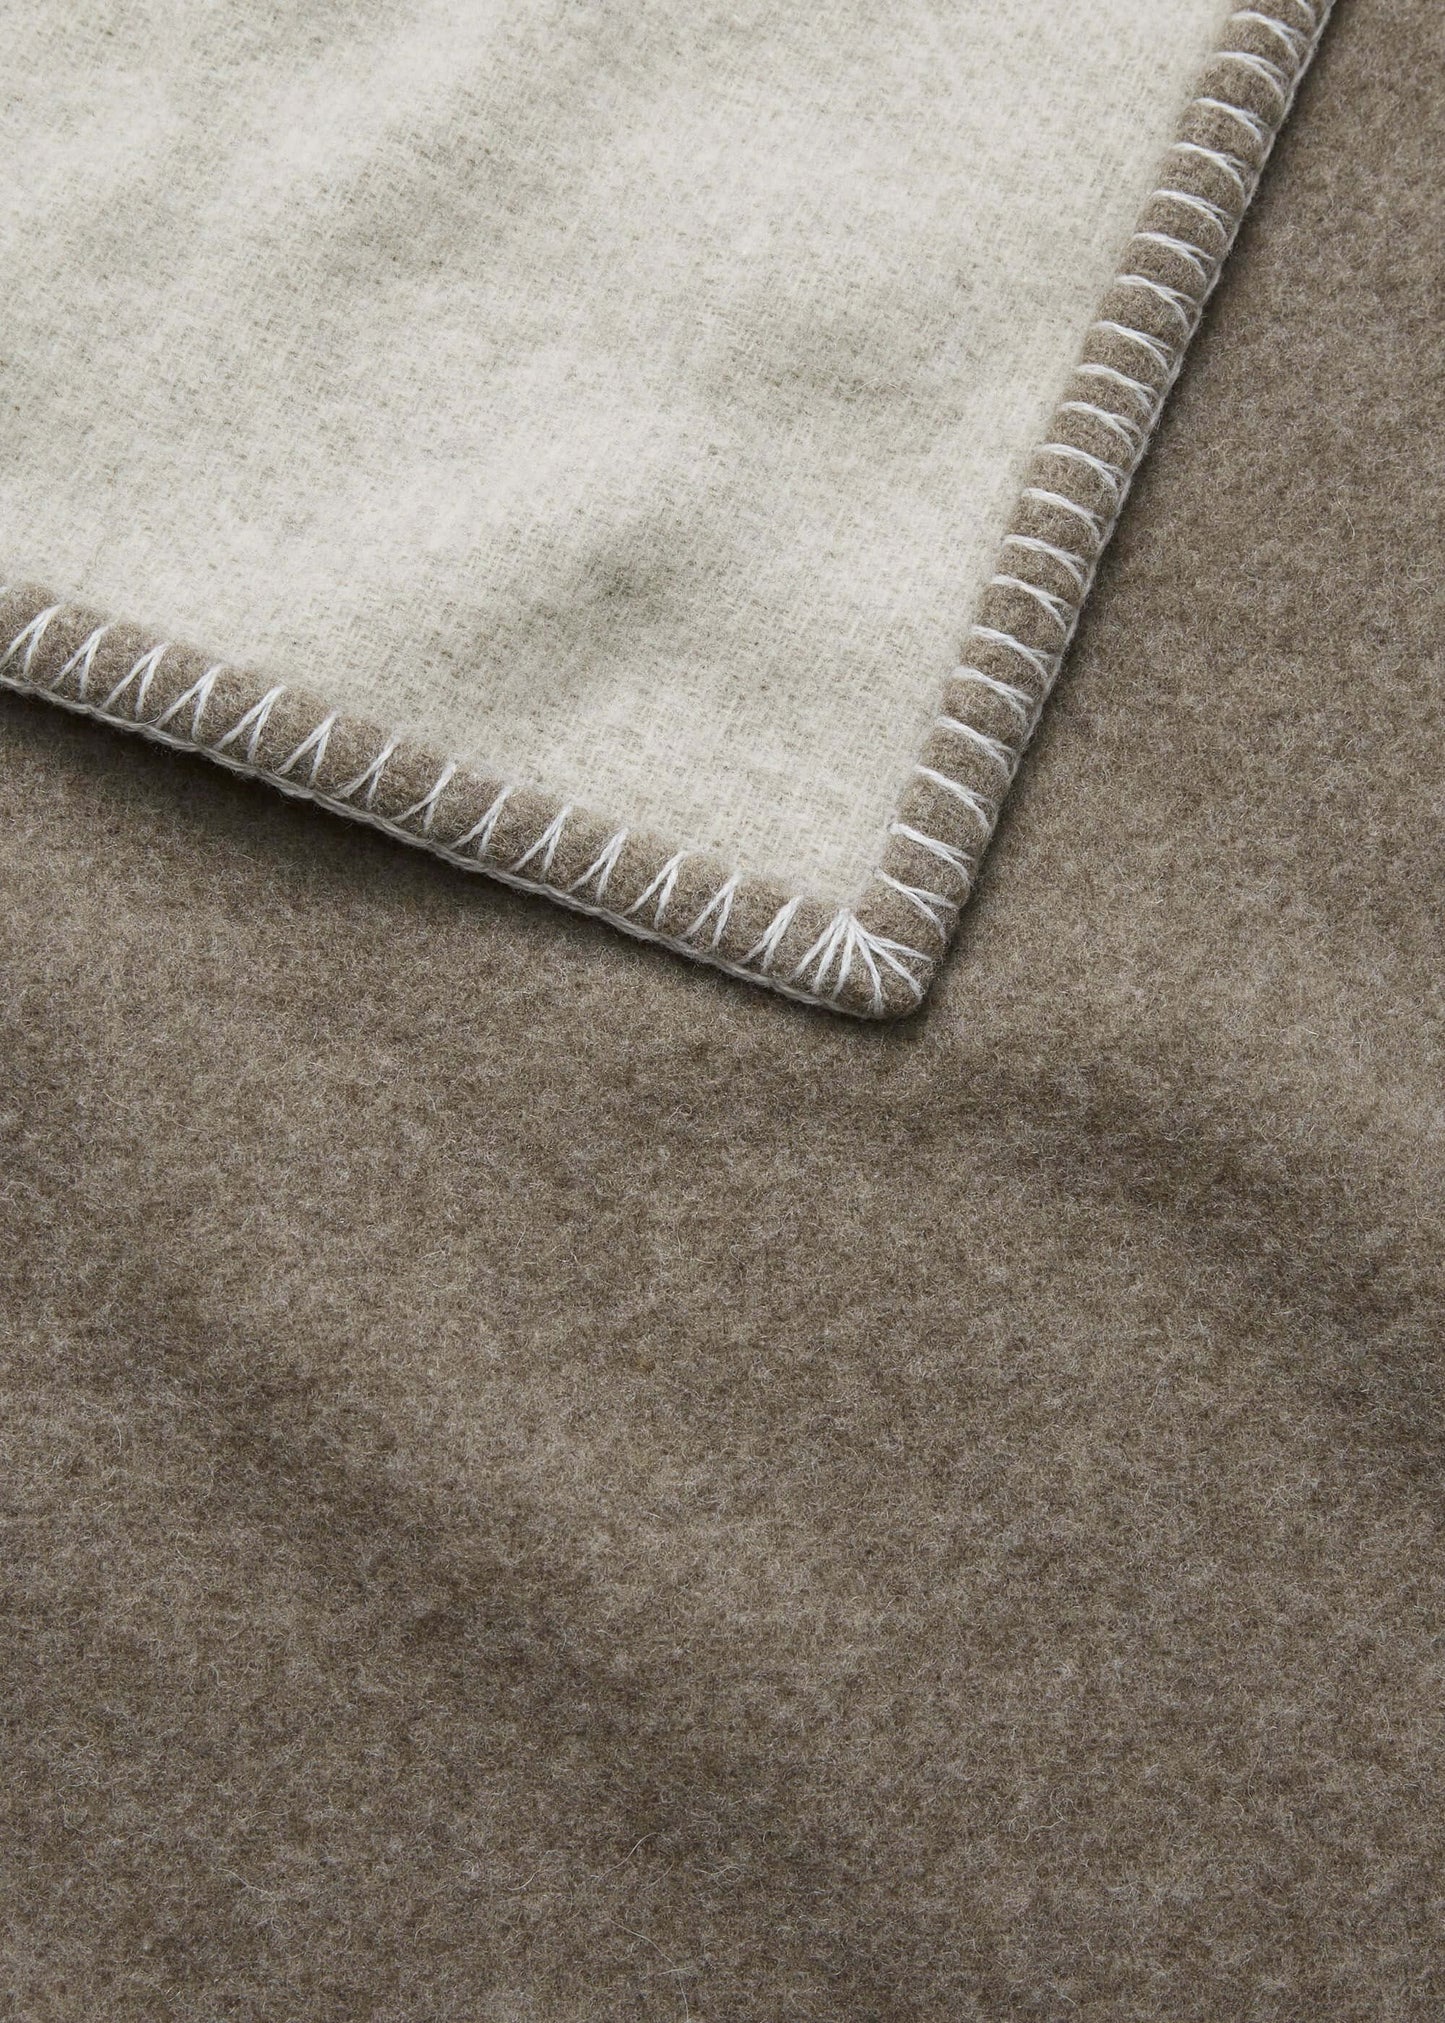 Veda Recycled Wool Throw